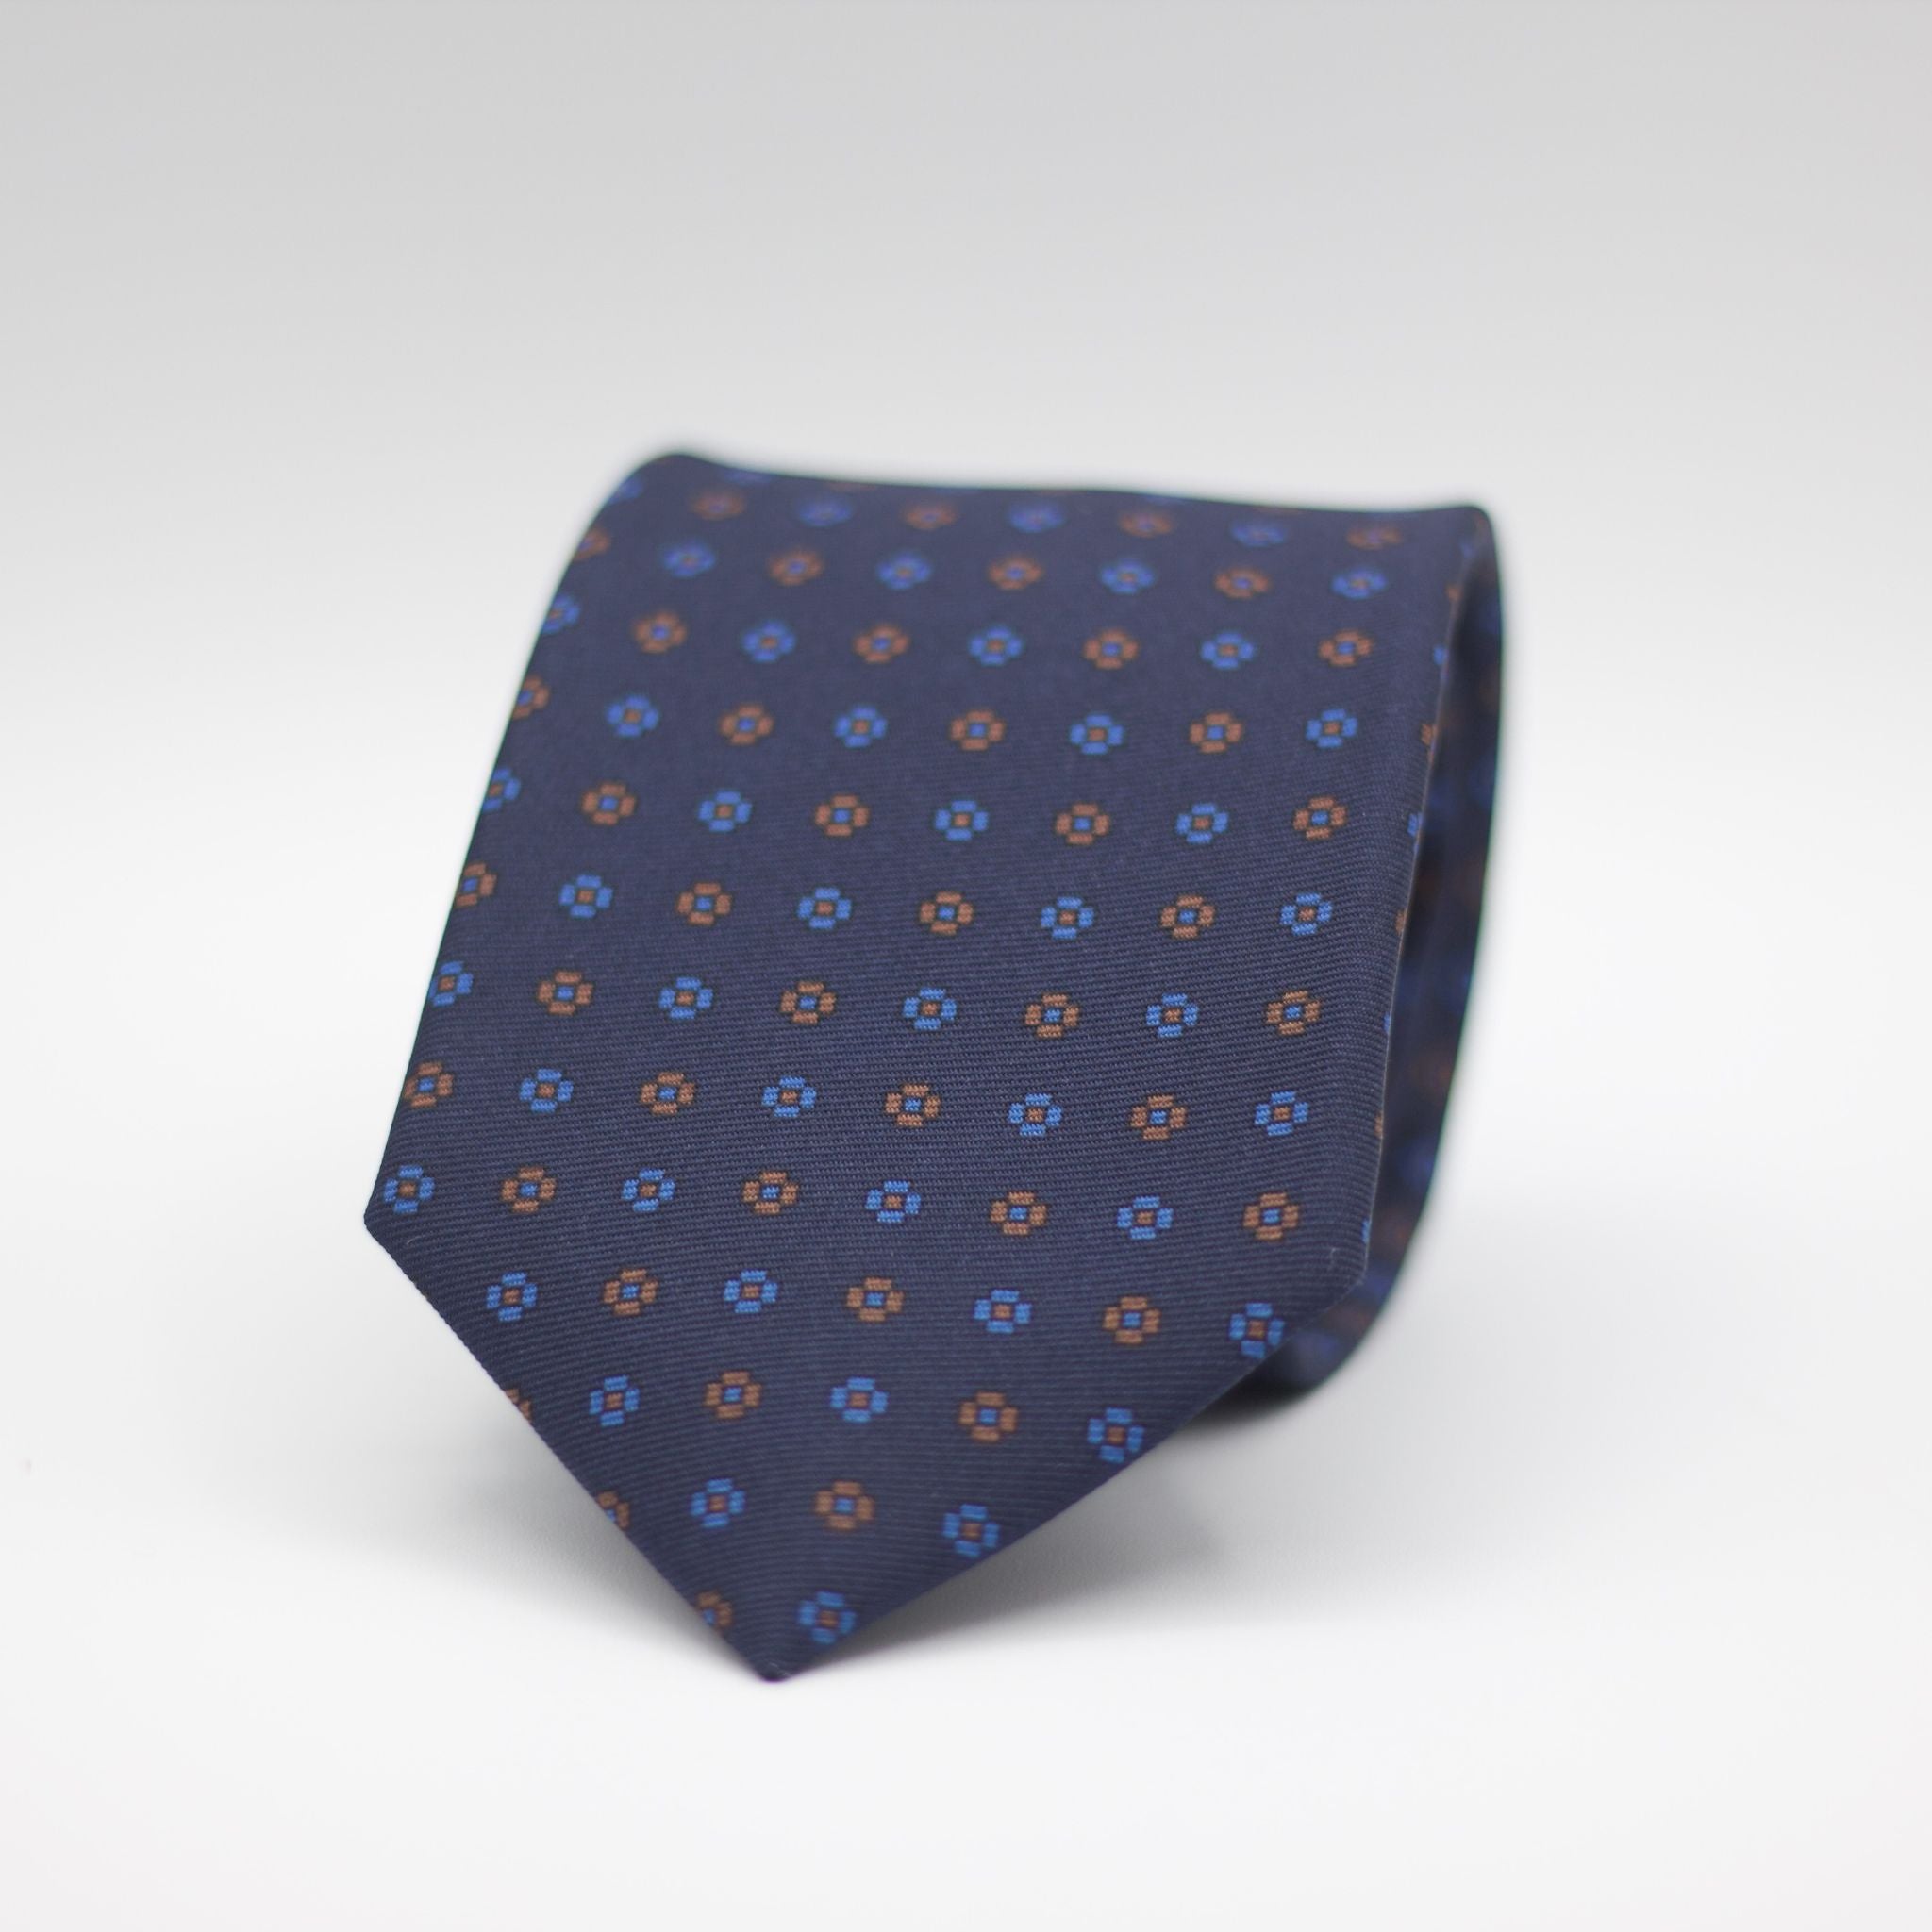 Holliday & Brown for Cruciani & Bella 100% printed Silk Self Tipped Navy with Brown and Light Blue motif tie  Handmade in Italy 8 cm x 150 cm